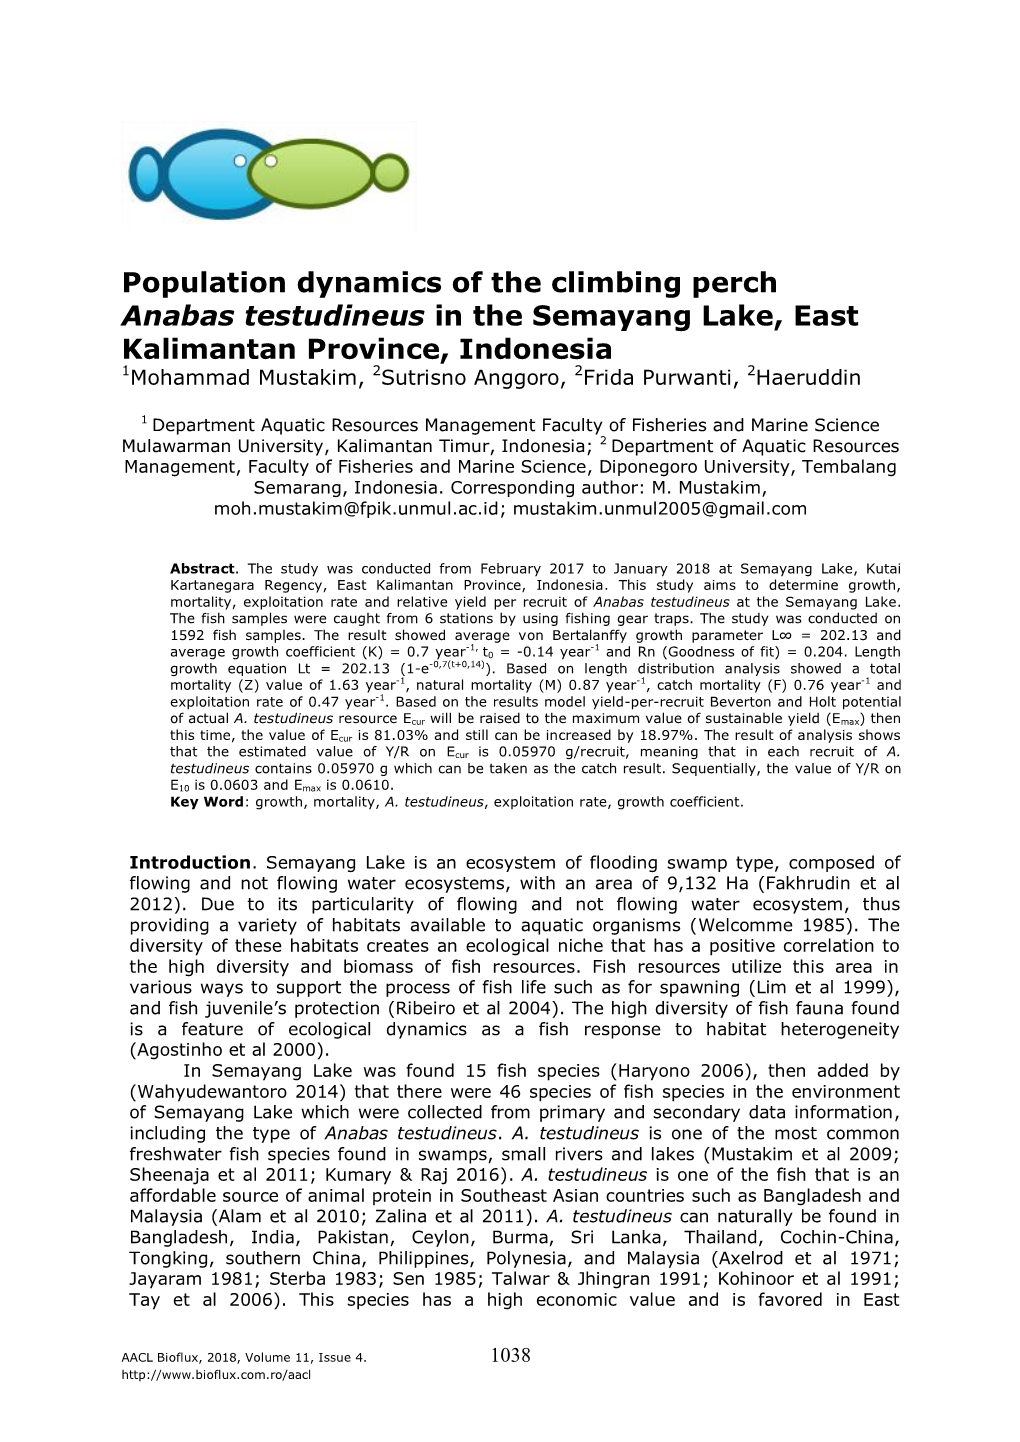 Population Dynamics of the Climbing Perch Anabas Testudineus in The